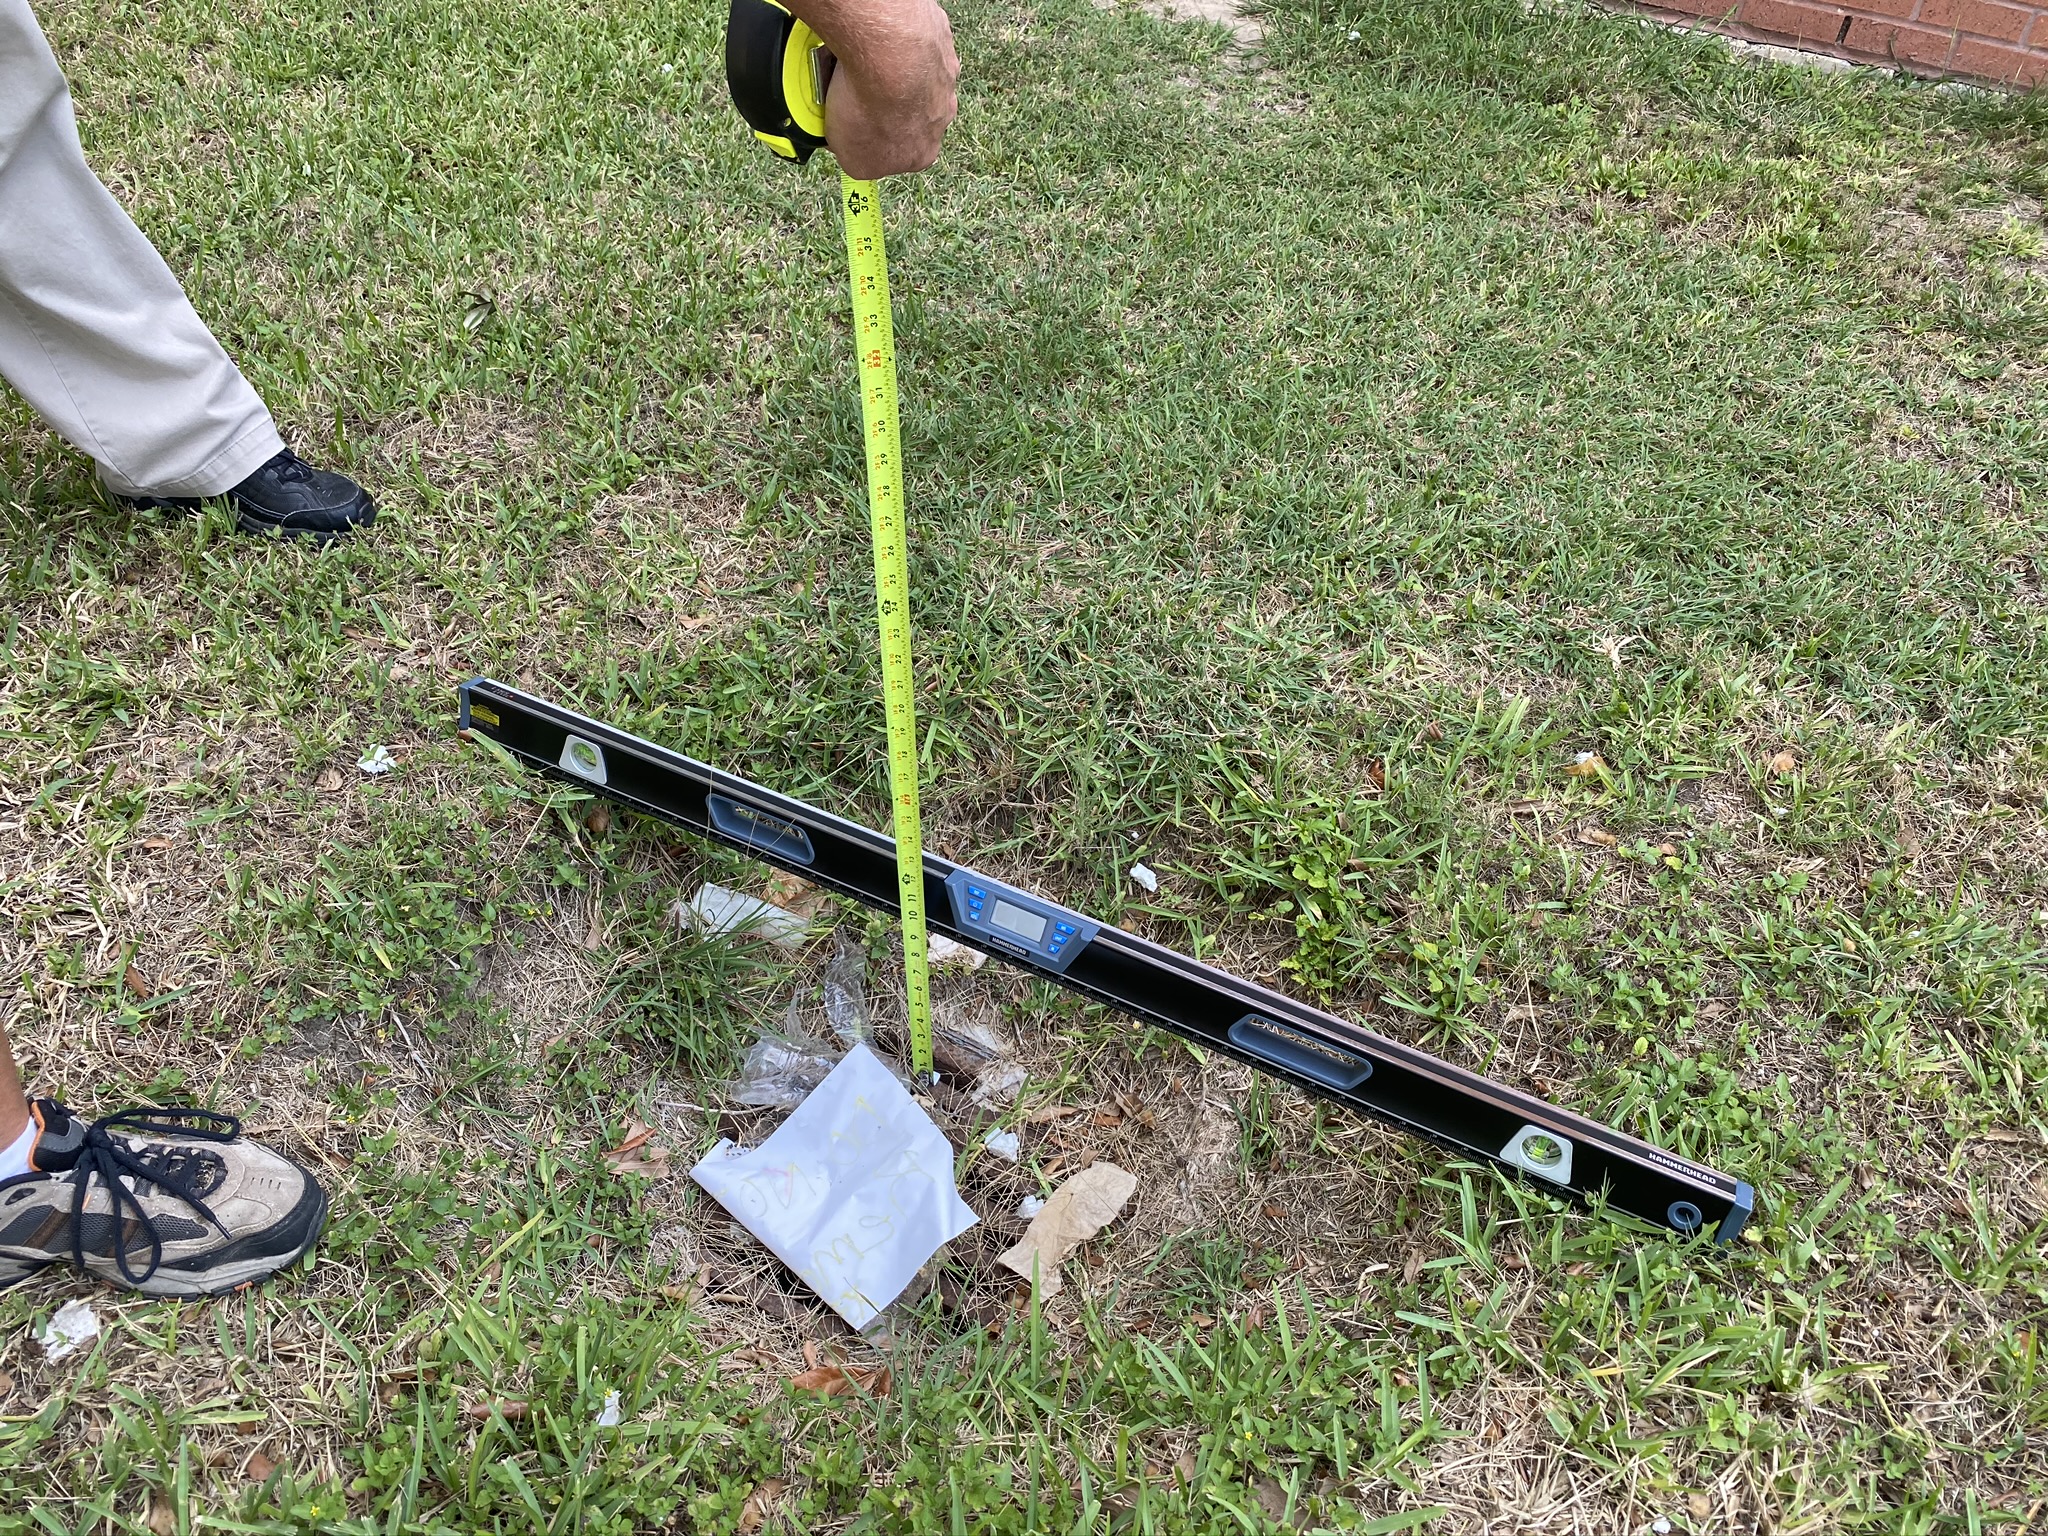 Picture of a below grade grate inlet with a level placed across the ground and someone holding a tape measure to show the depth below grade of around 10 inches